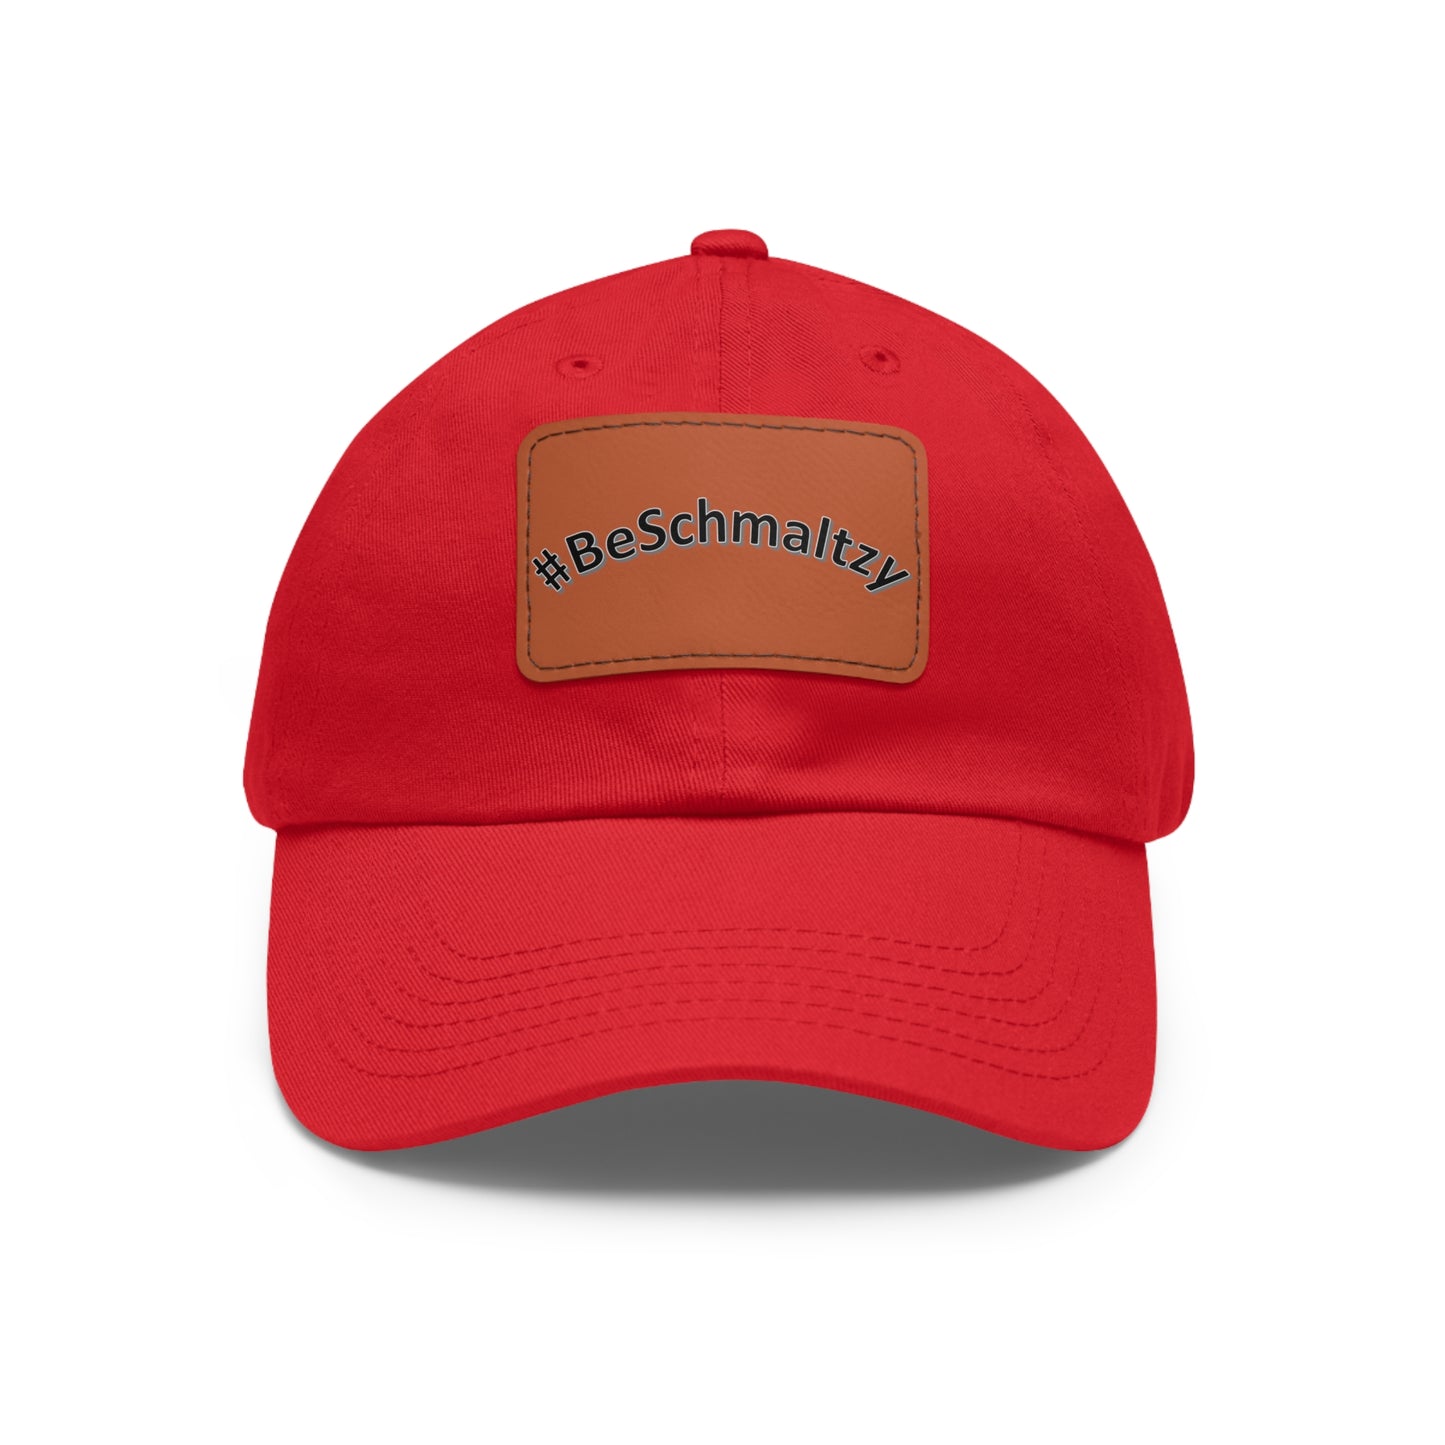 #BeSchmaltzy - Hat with Leather Patch (Rectangle)